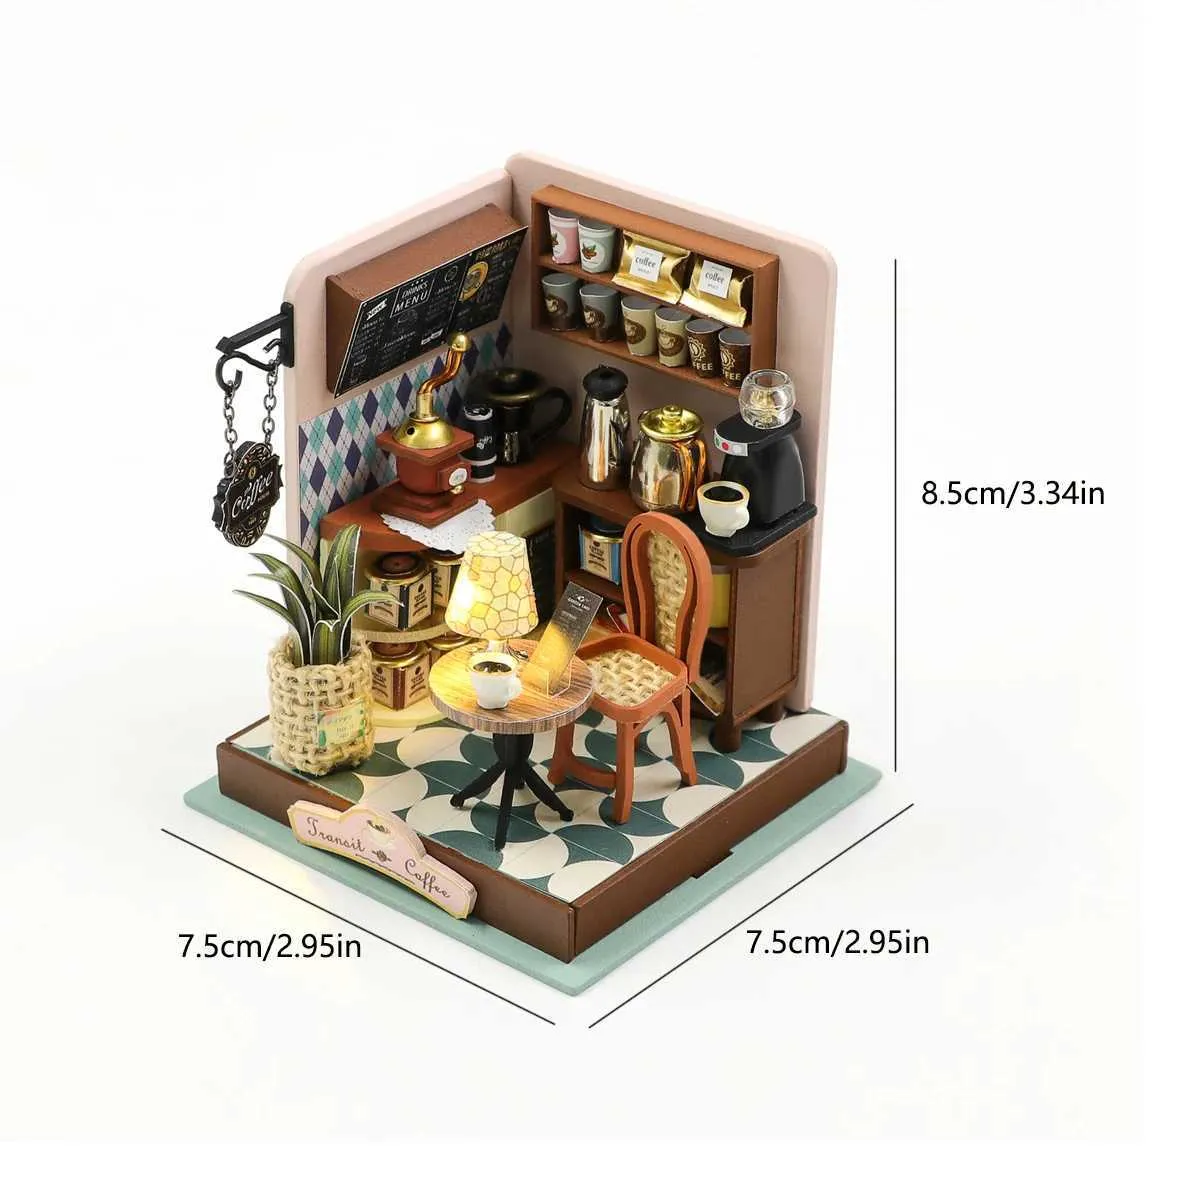 Architecture/DIY House Coffee Shop Baby House Kit Mini DIY Handmade 3D Puzzle Assembly Building Model Toys Home Bedroom Decoration with Furniture Wood